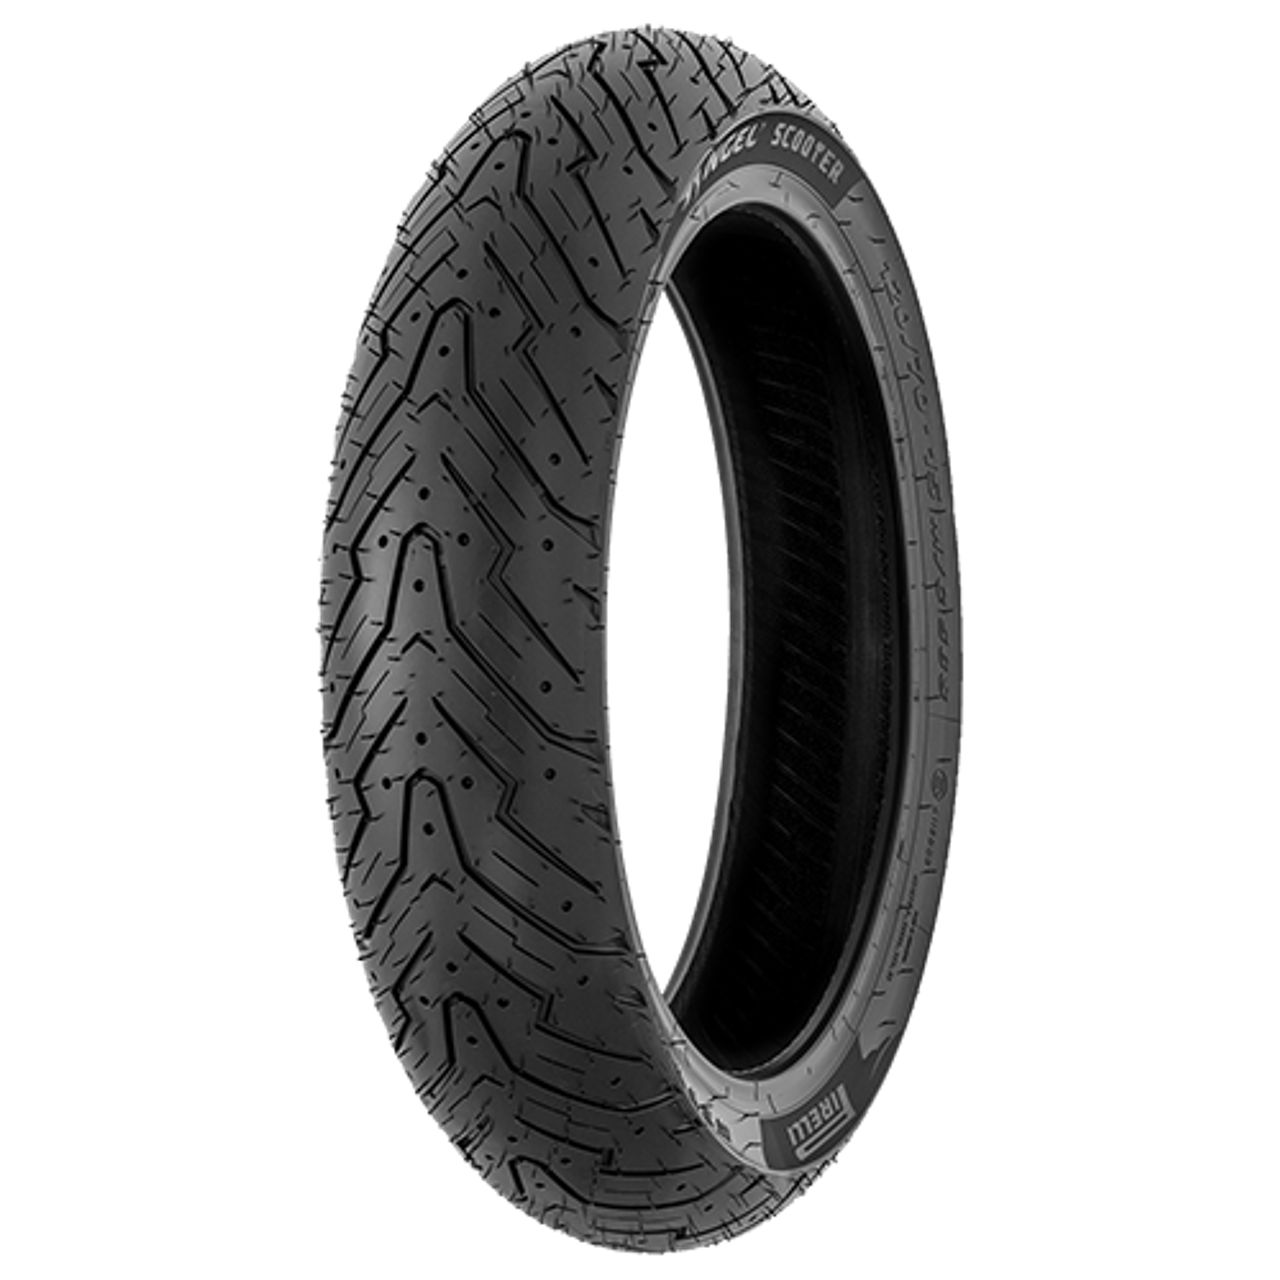 PIRELLI ANGEL SCOOTER 120/70 - 15 M/C TL 56P FRONT